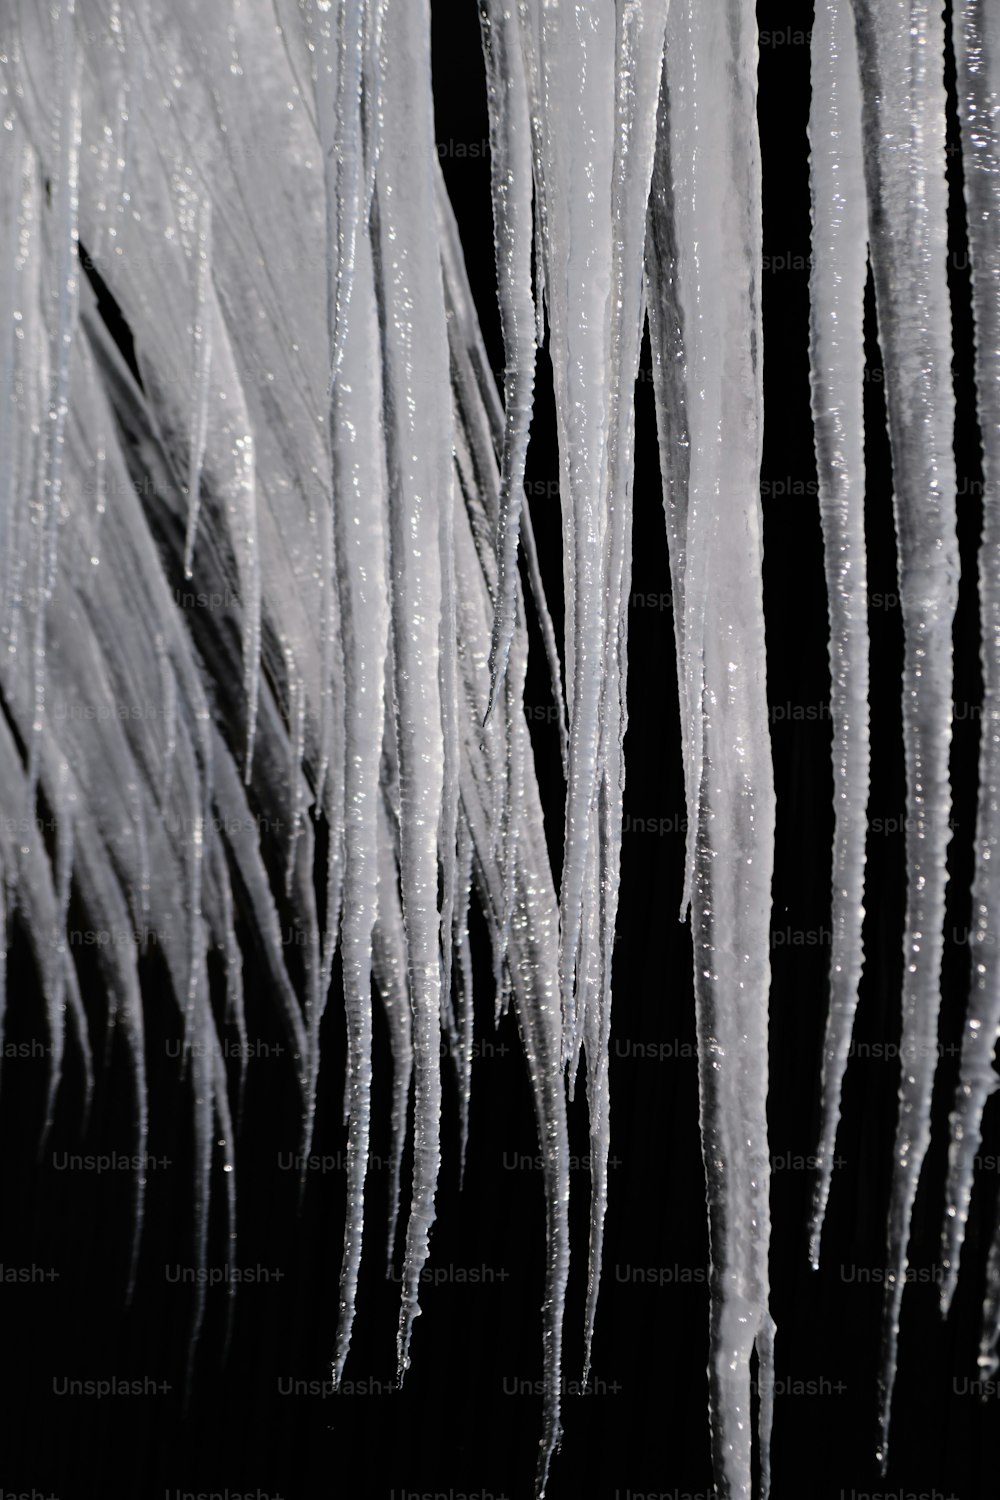 icicles hanging from the ceiling of a building